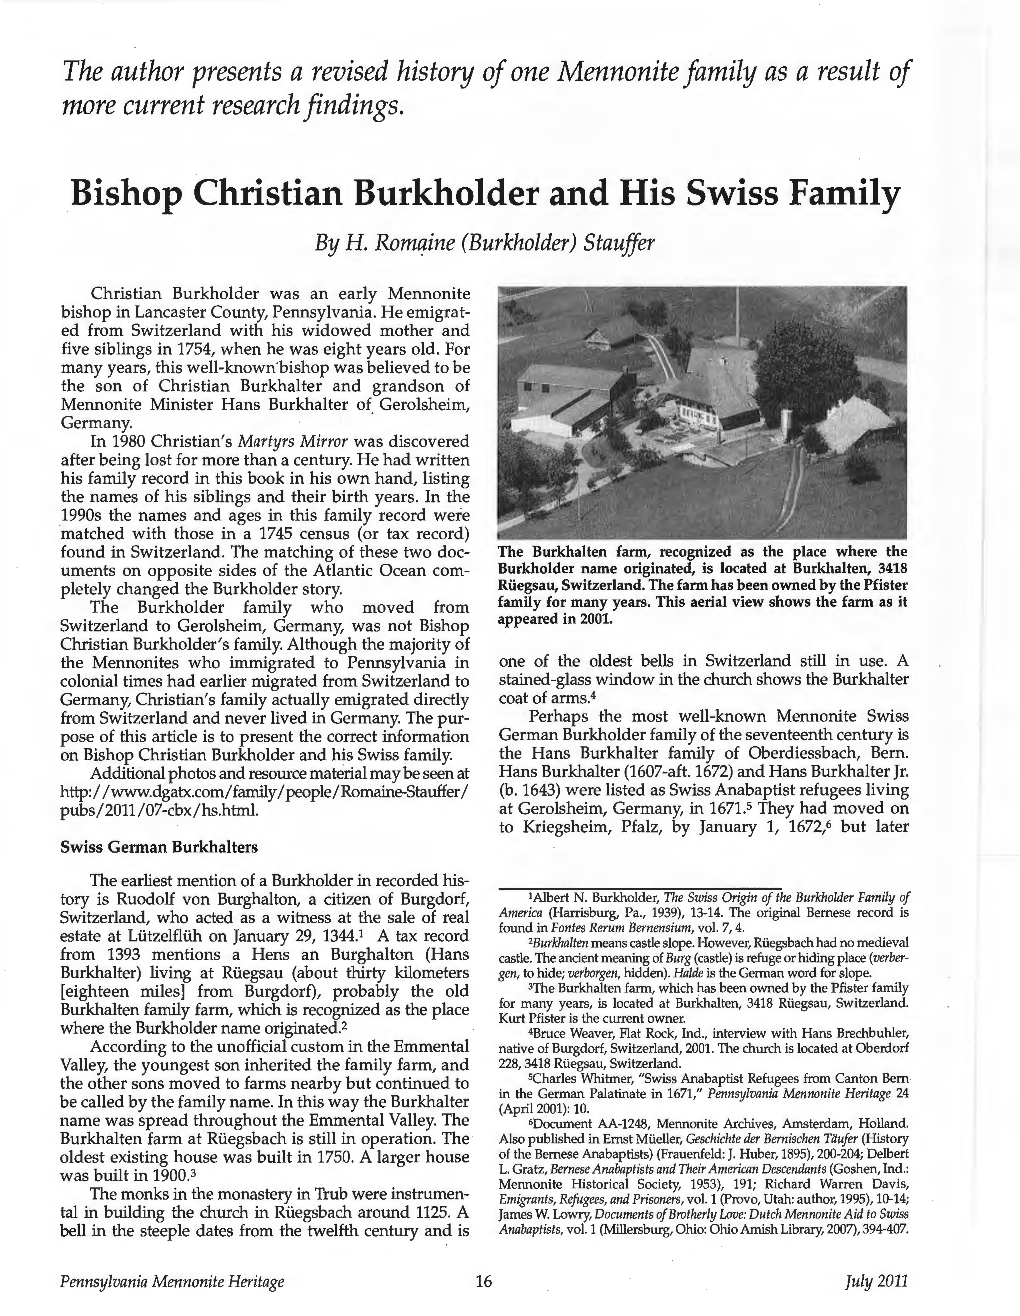 Bishop Christian Burkholder and His Swiss Family by H